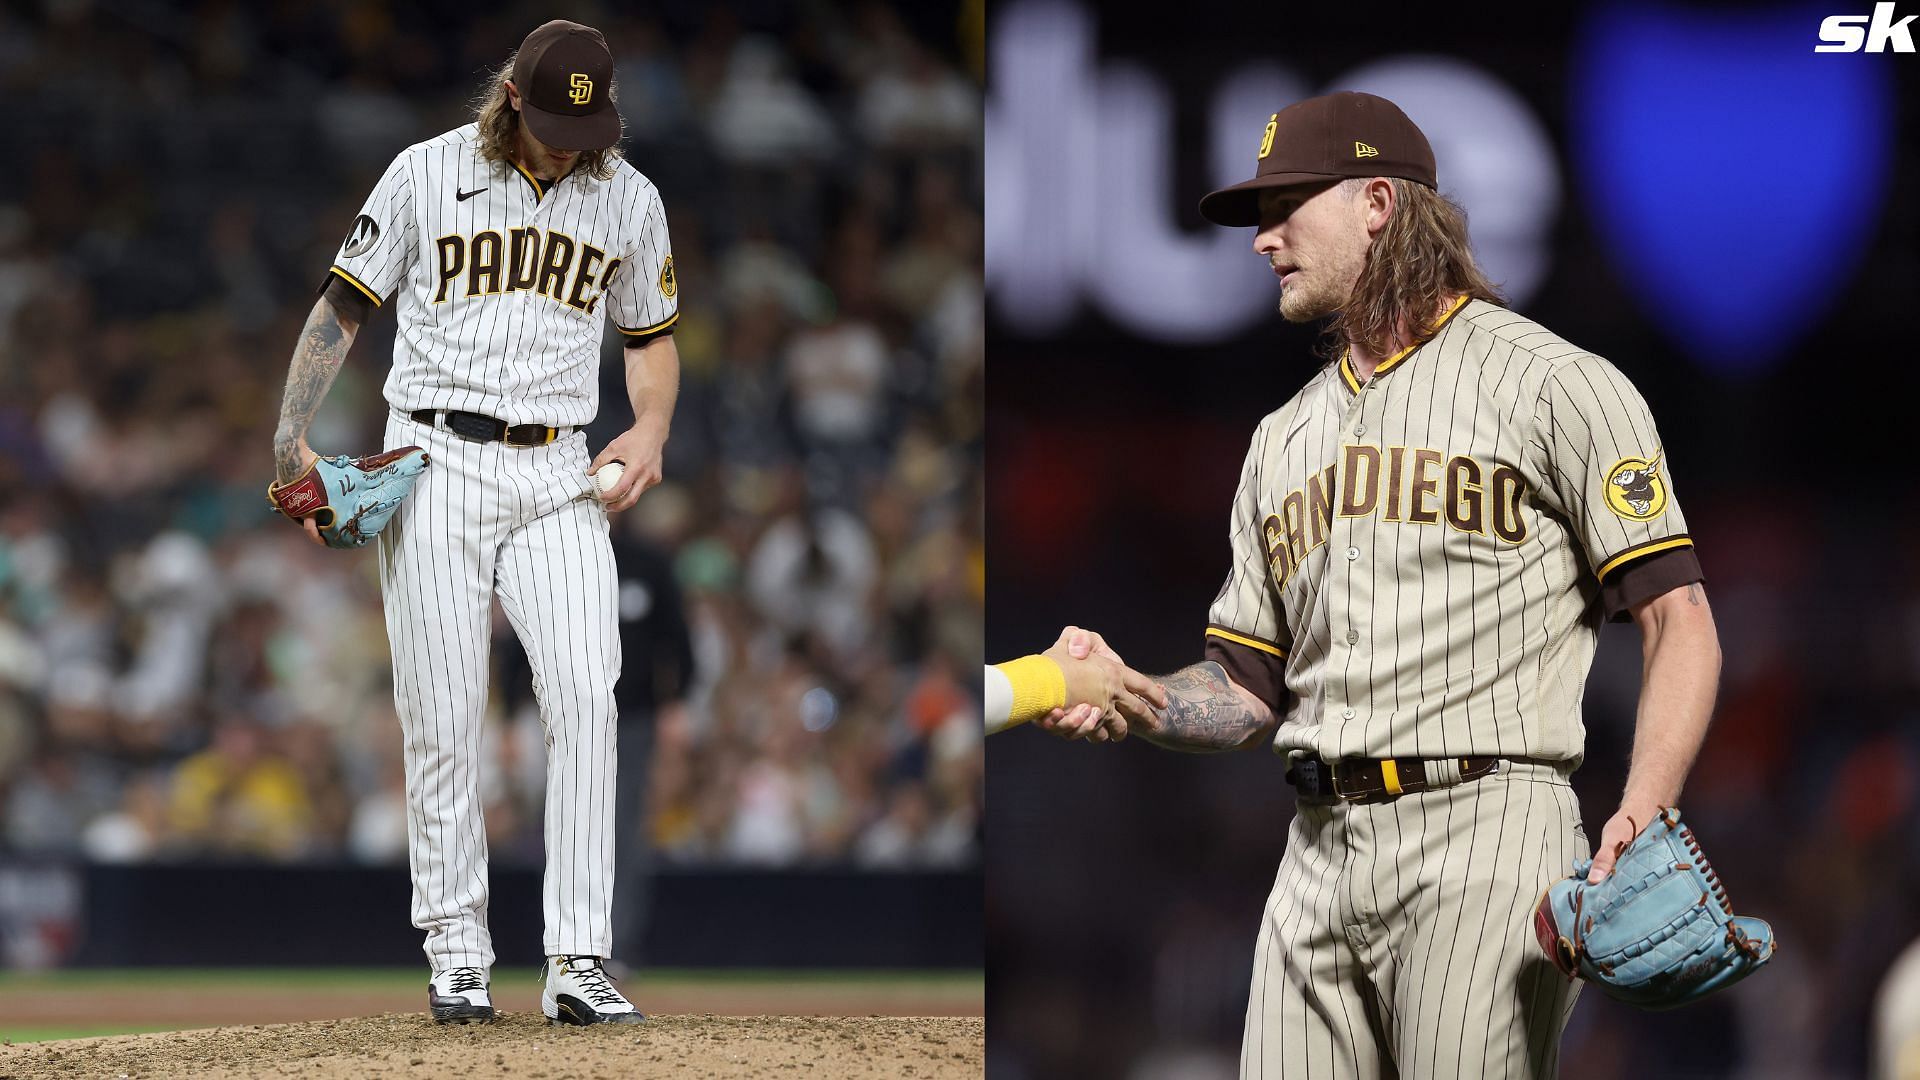 Josh Hader of the San Diego Padres reacts after allowing a single against the Colorado Rockies